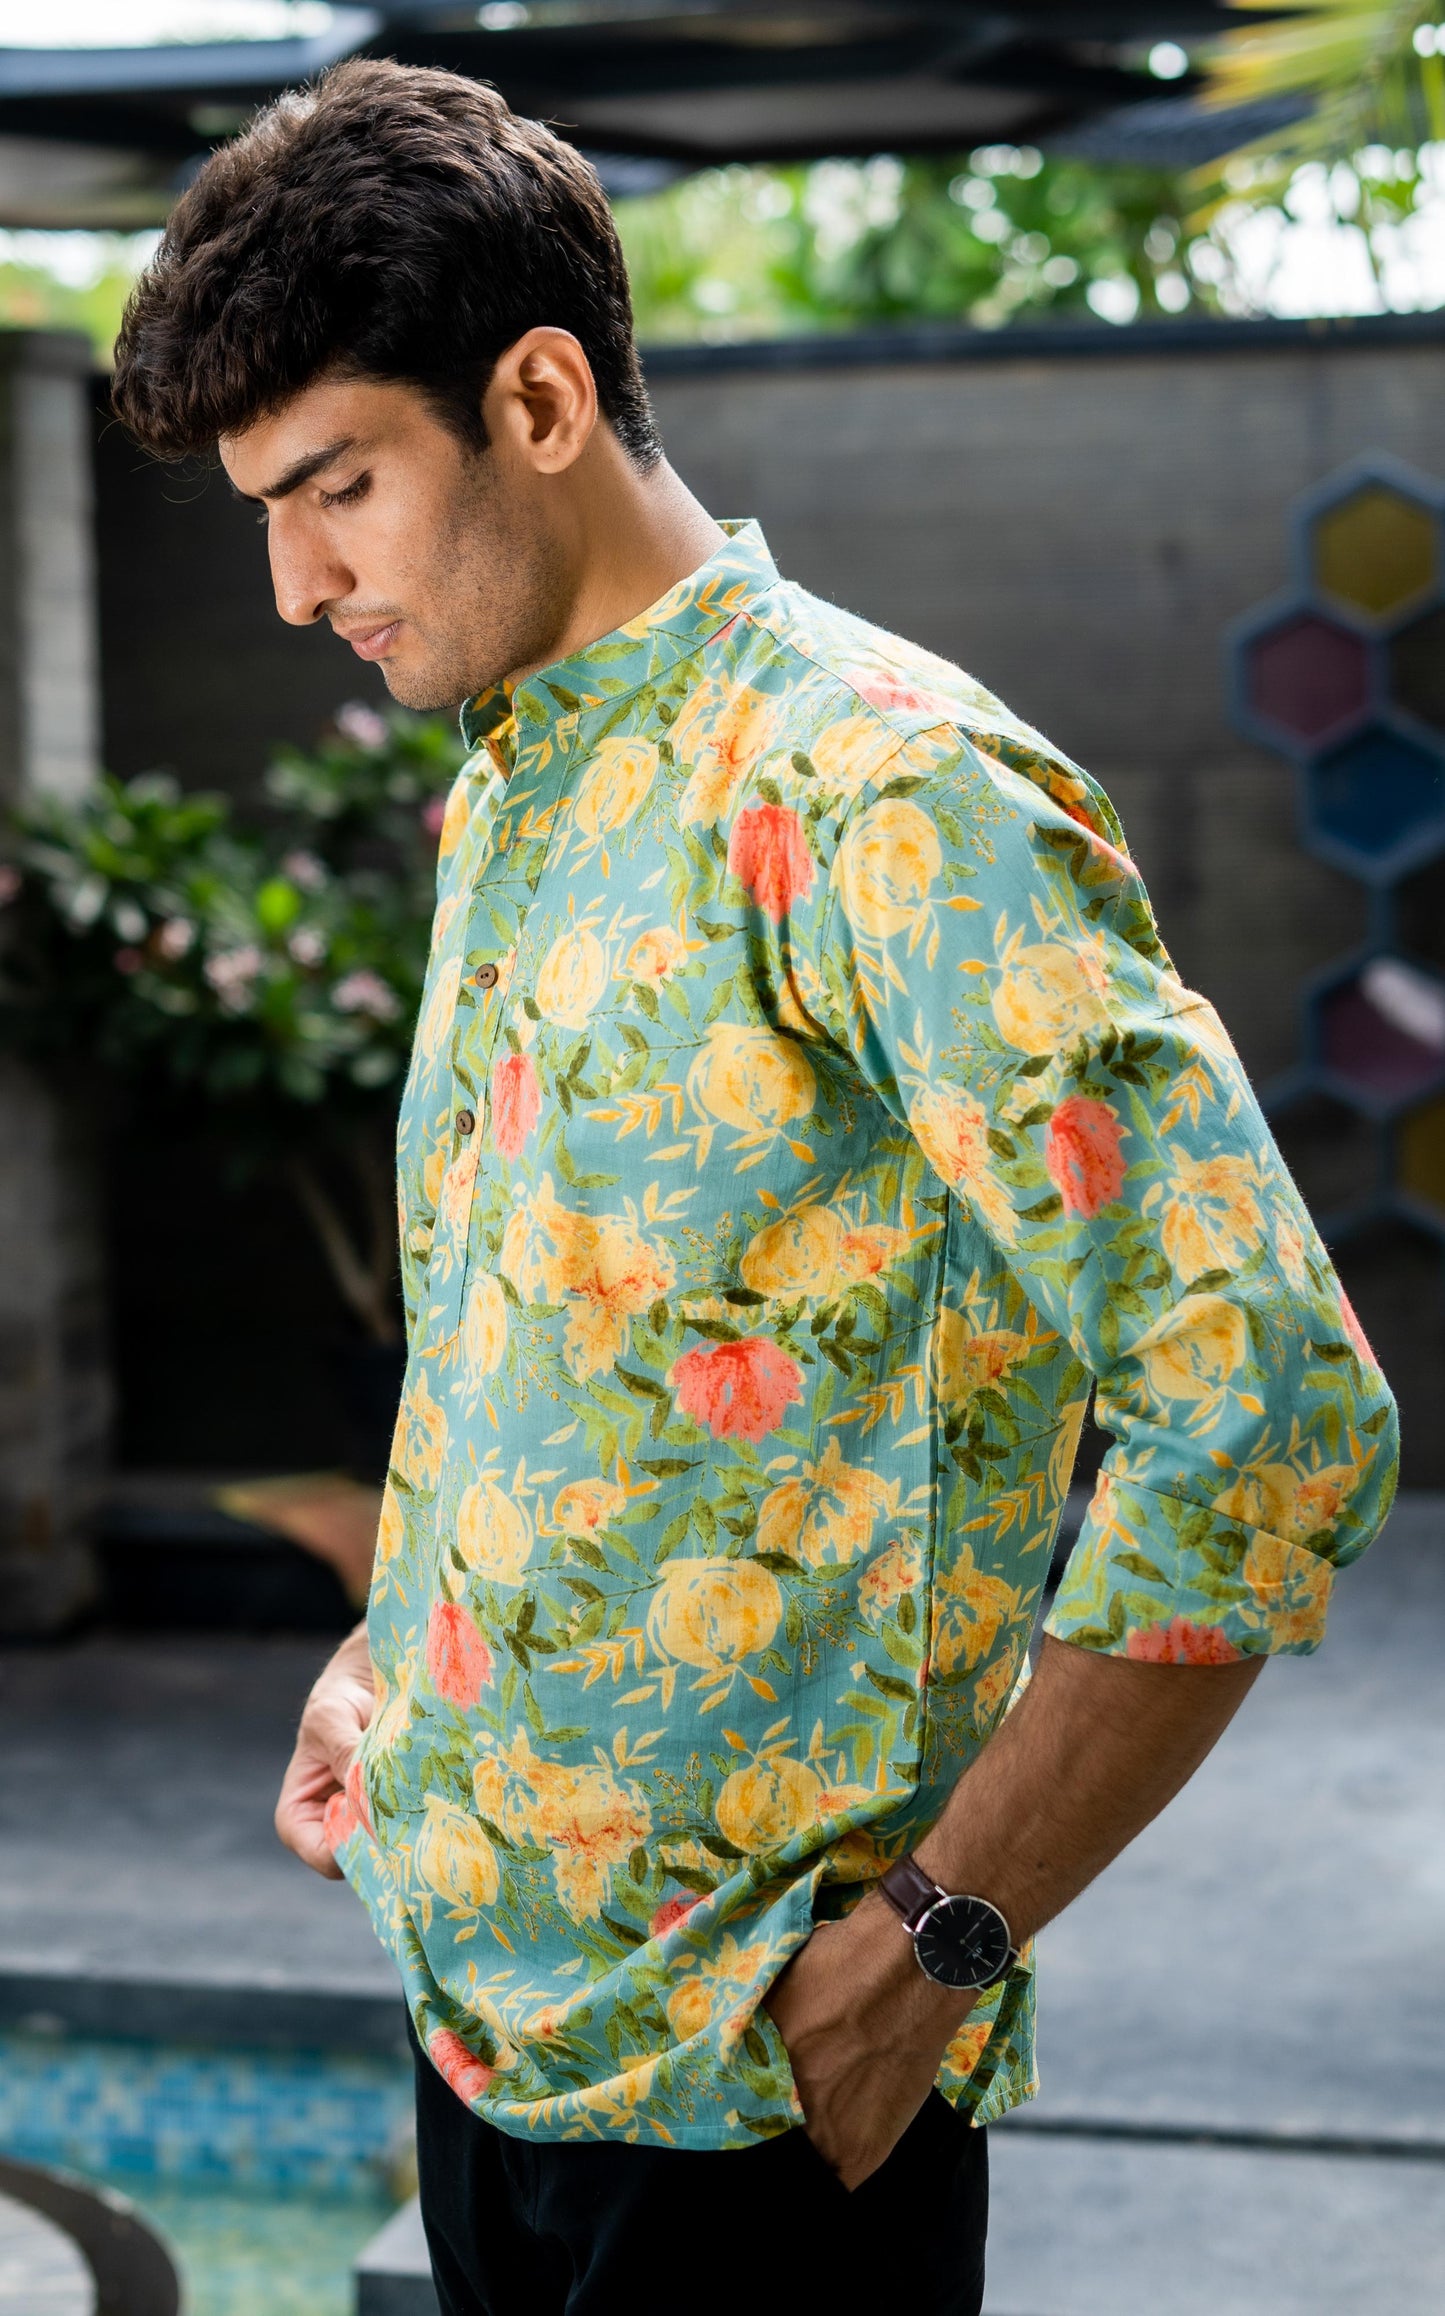 The Funky Green And Yellow All-Over Floral Print Short Kurta